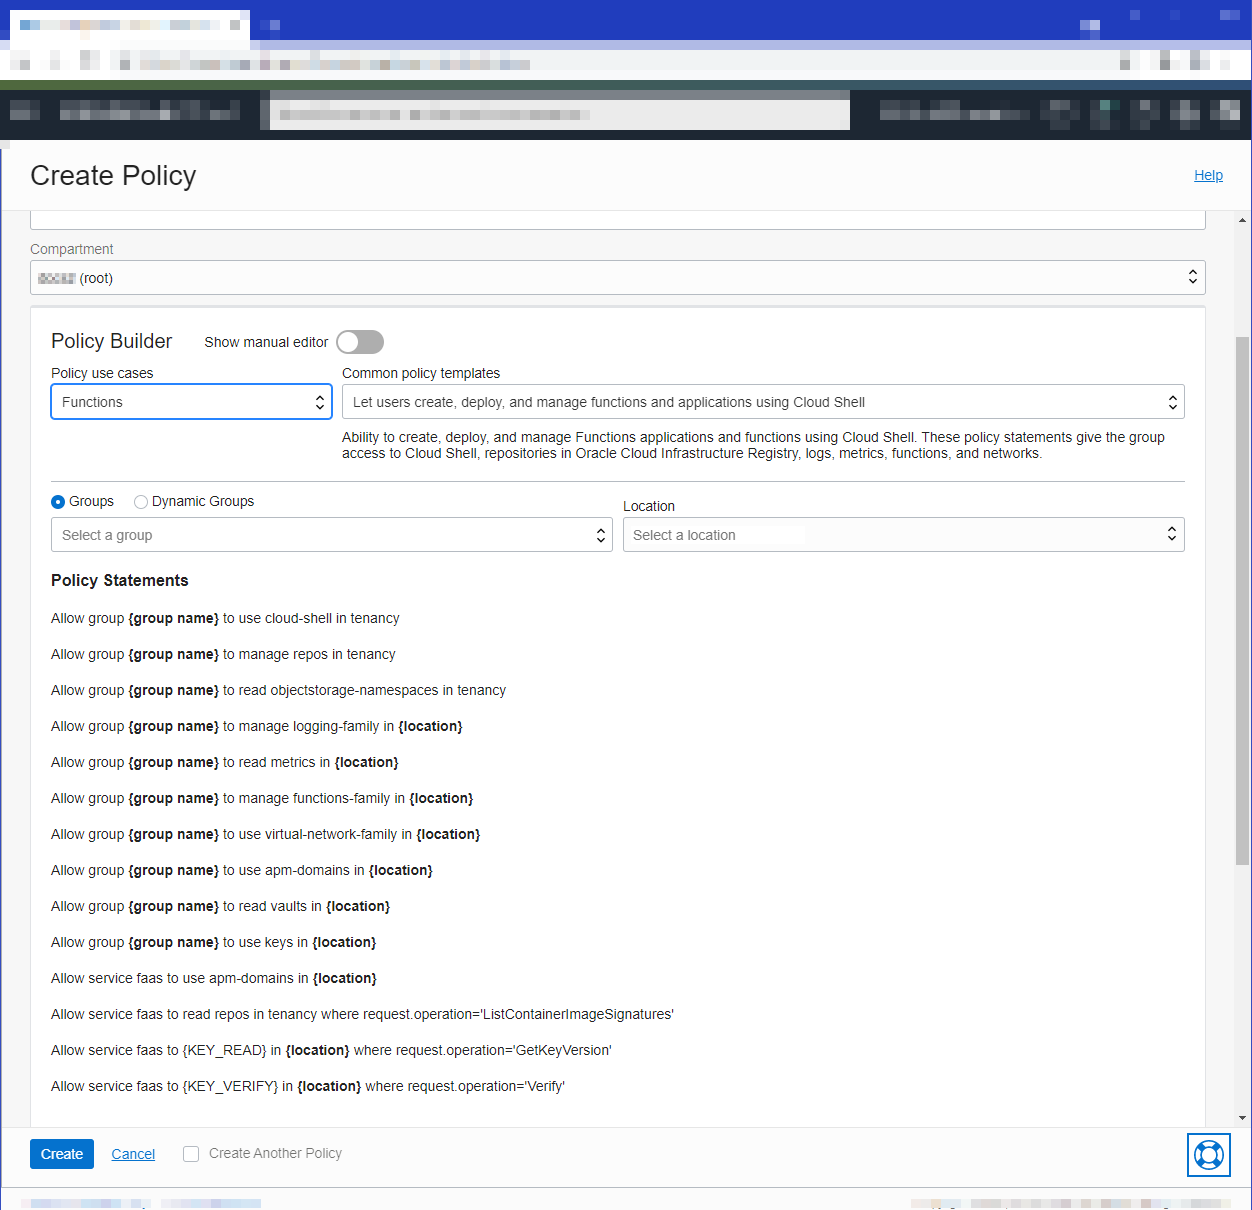 This image shows the Create Policy dialog, with empty Name, Description, and Compartment fields. The "Let users create, deploy, and manage functions and applications using Cloud Shell" template is shown in the Common policy templates field. Several of the policy statements are shown.